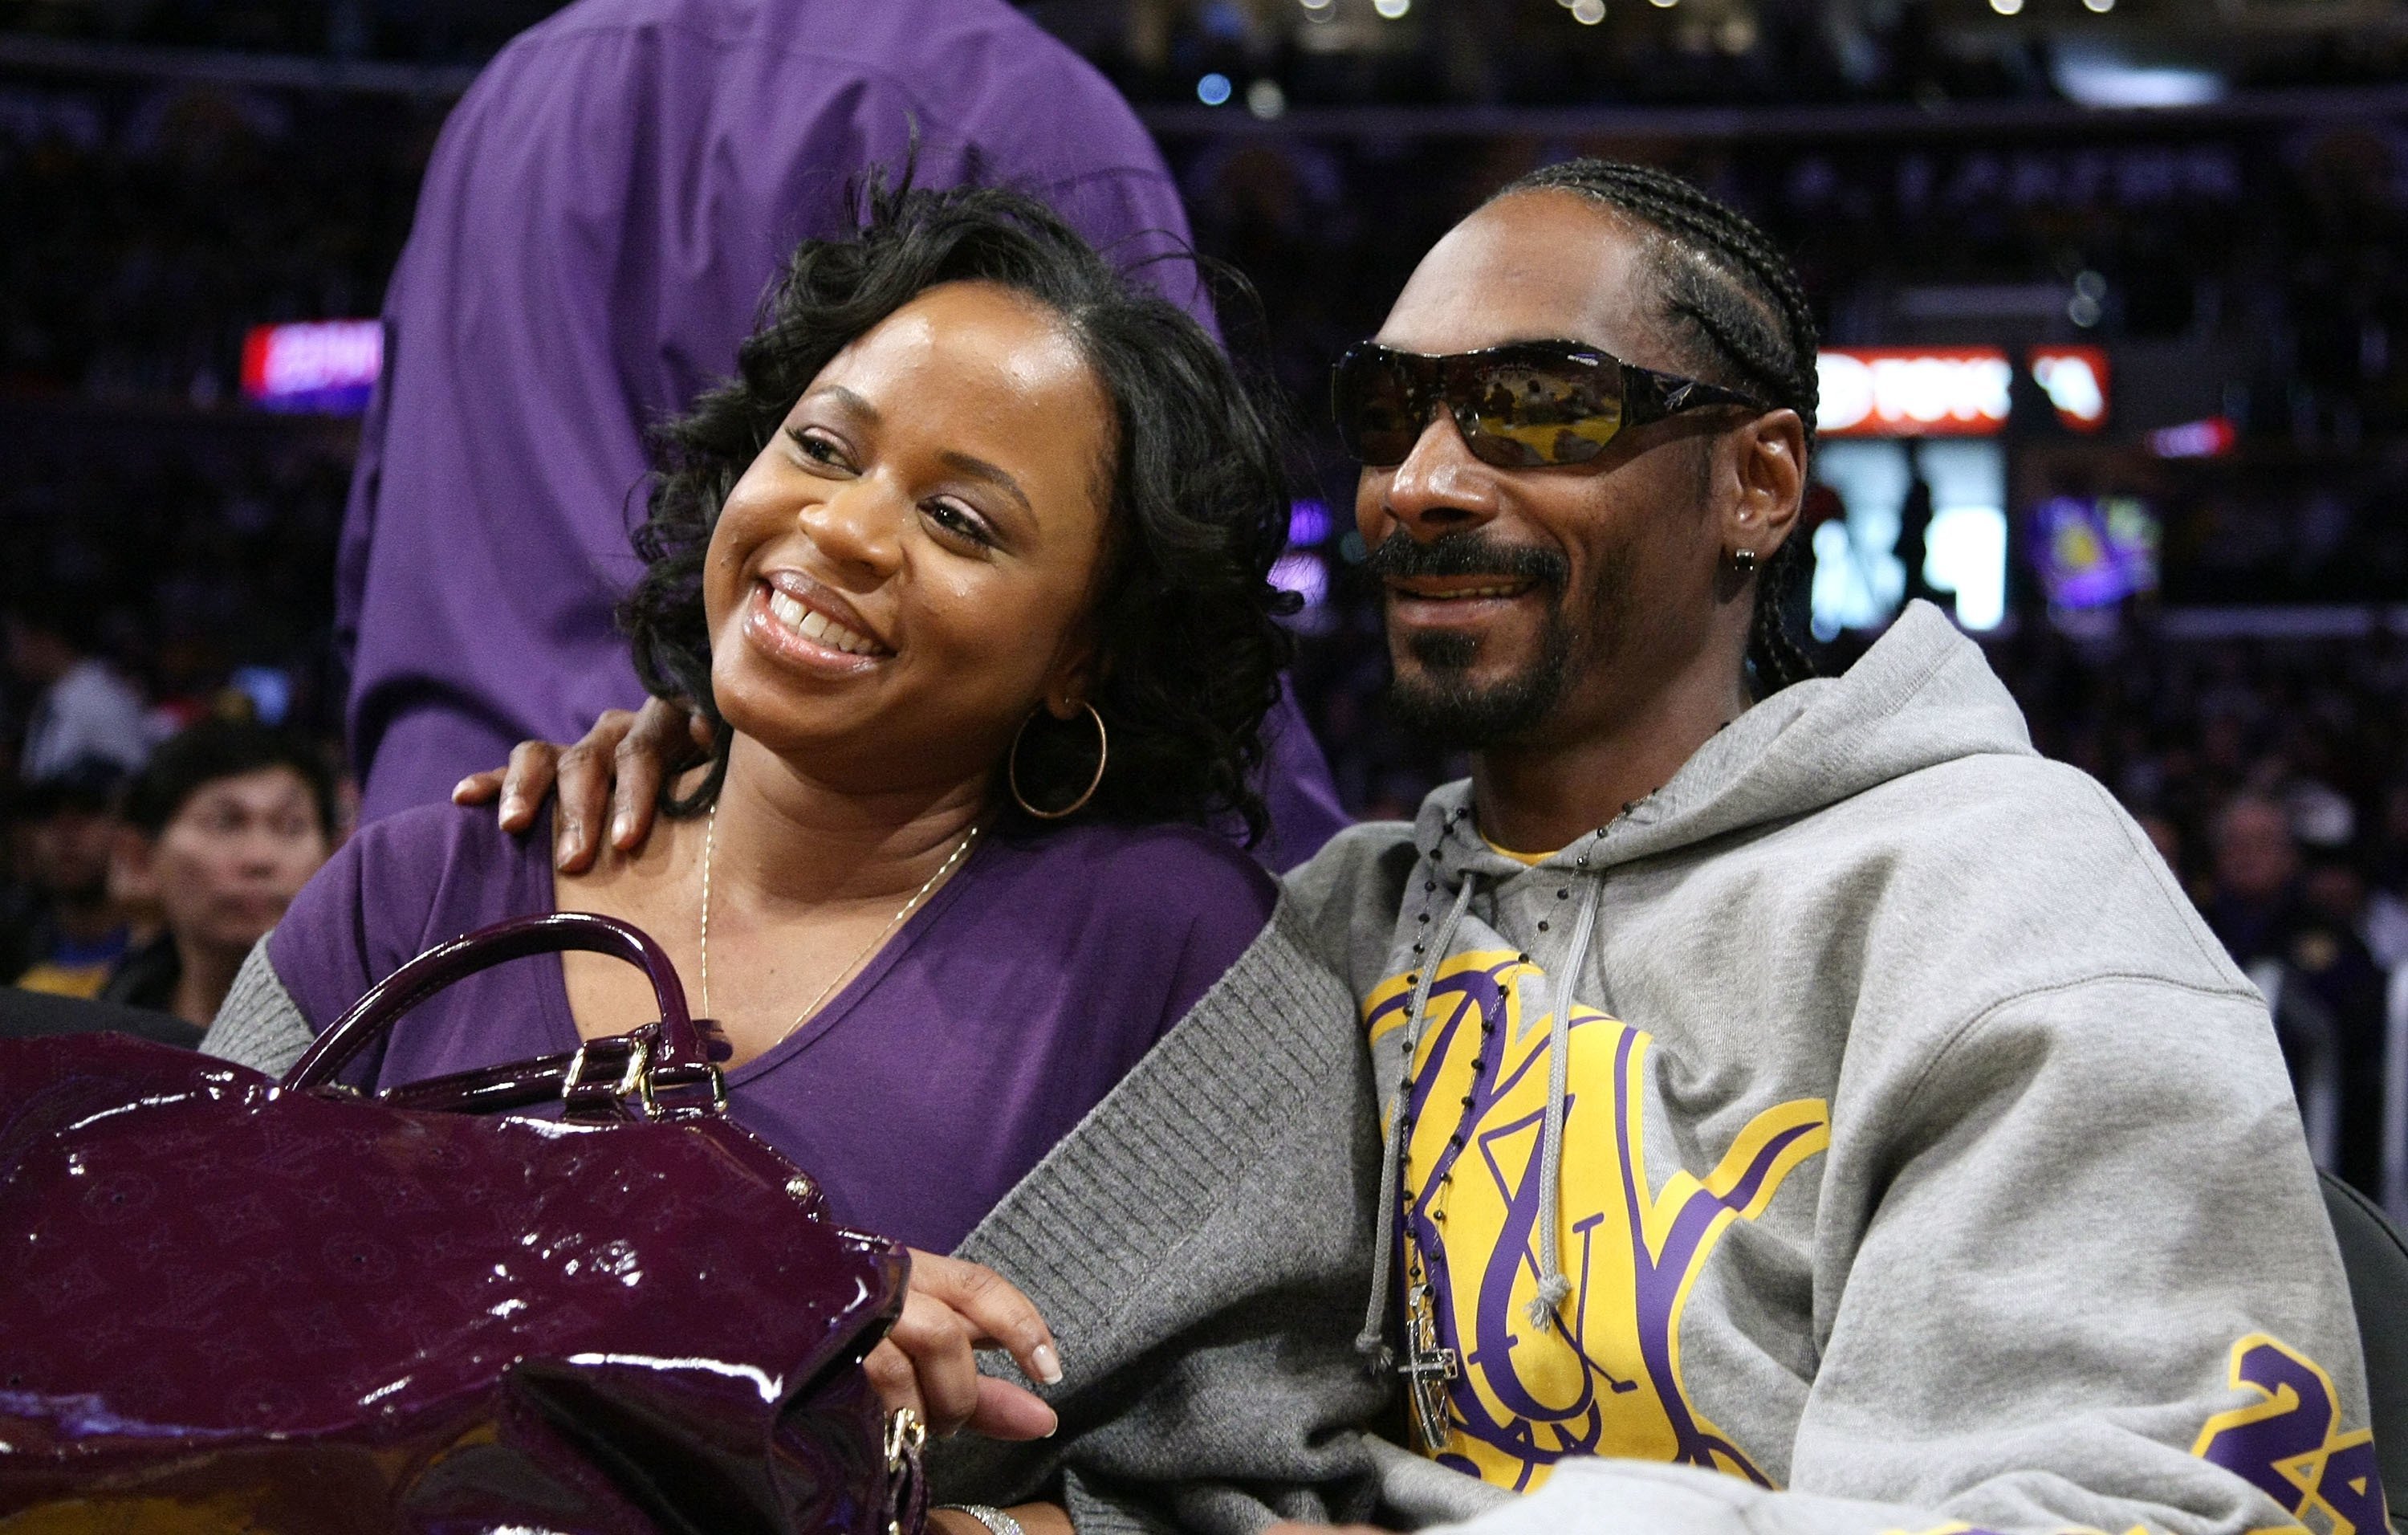 Rapper Snoop Dogg (R) and his wife Shante Broadus (L) attend the Los Angeles Lakers vs Boston Celtics game at the Staples Center | Photo: Getty Images